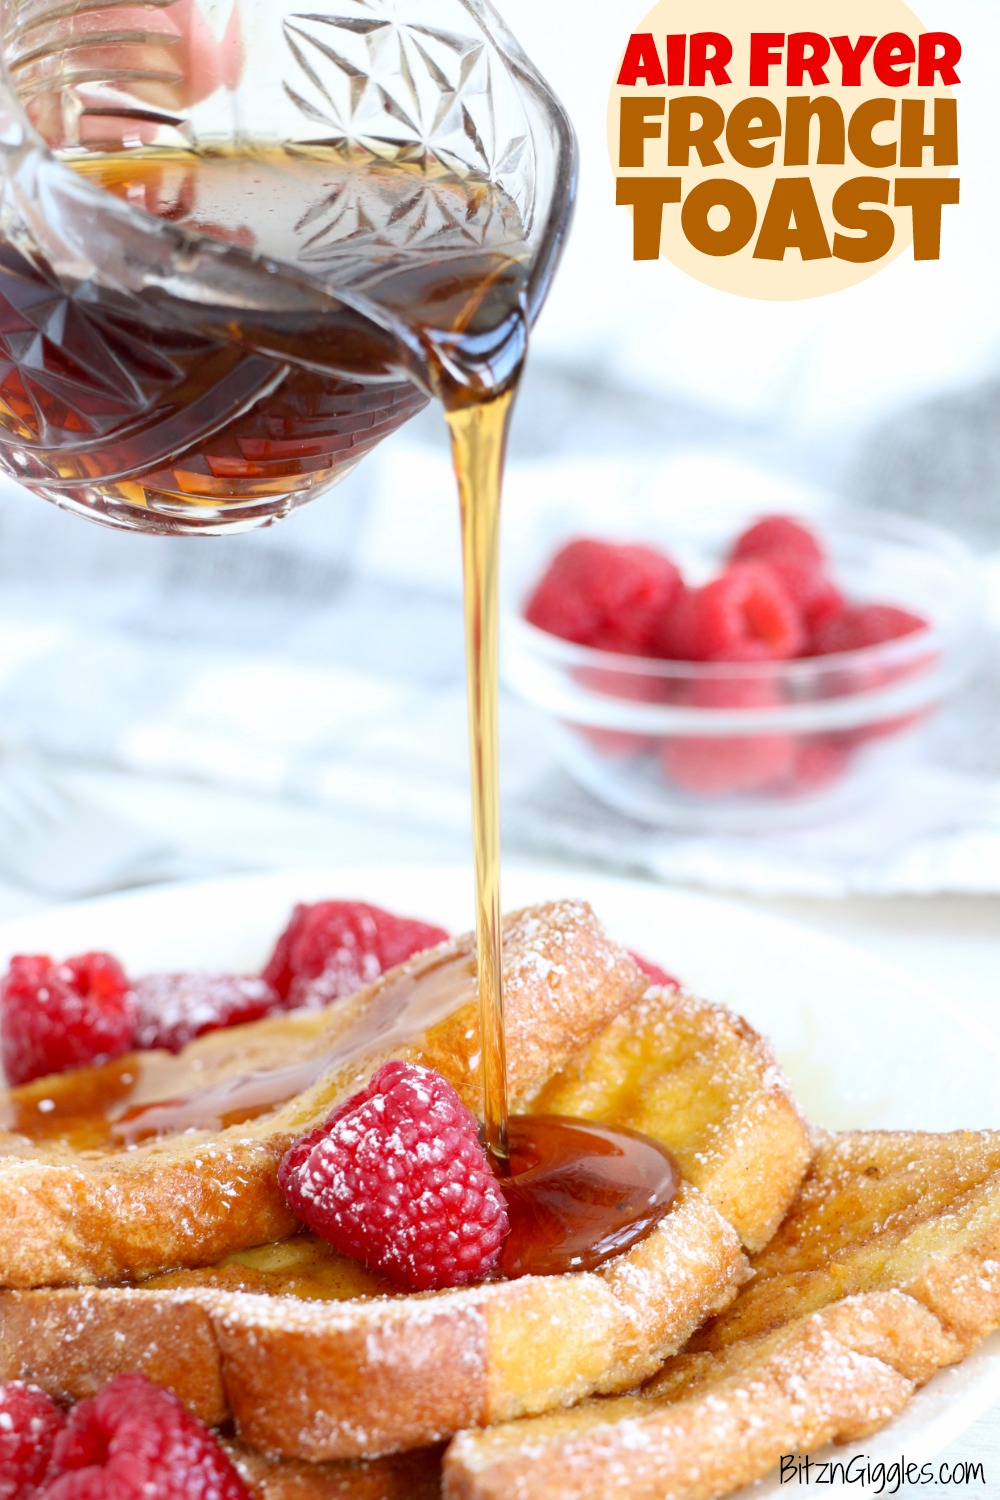 Pouring syrup on french toast